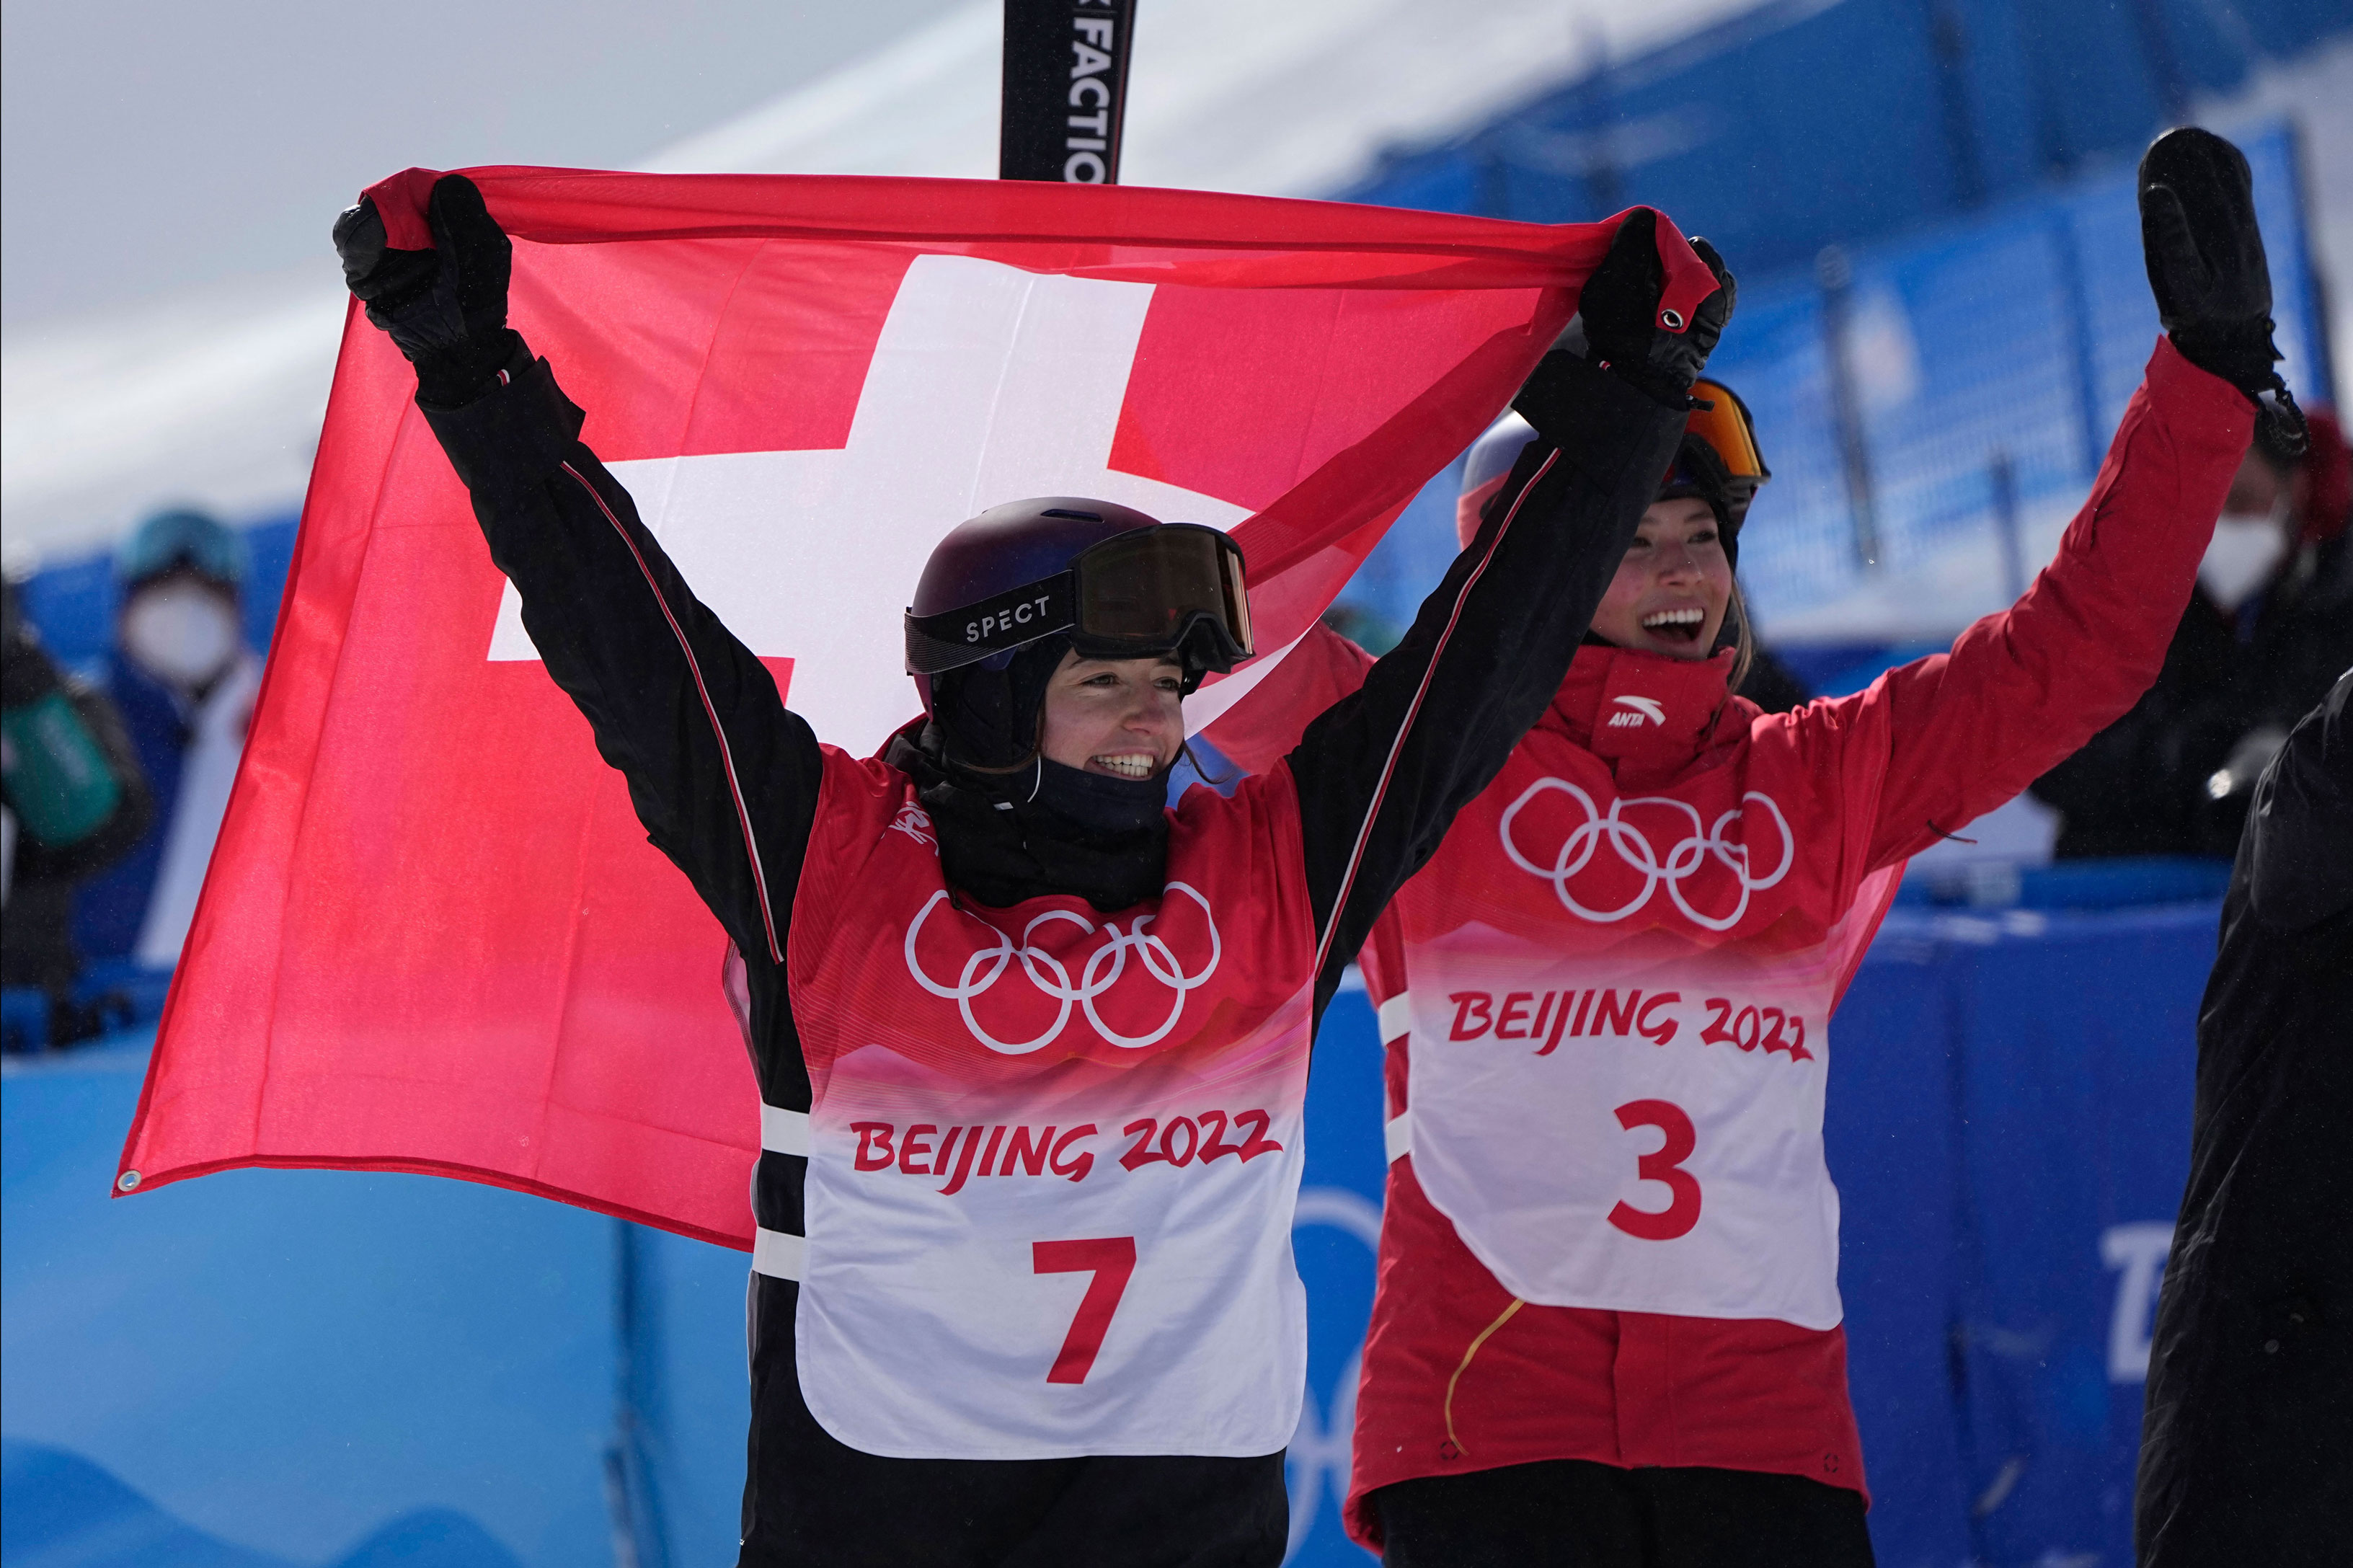 Mathilde Gremaud of Switzerland celebrates her gold medal win with silver medalist Eileen Gu of China, at the women's freeski slopestyle final on Tuesday.